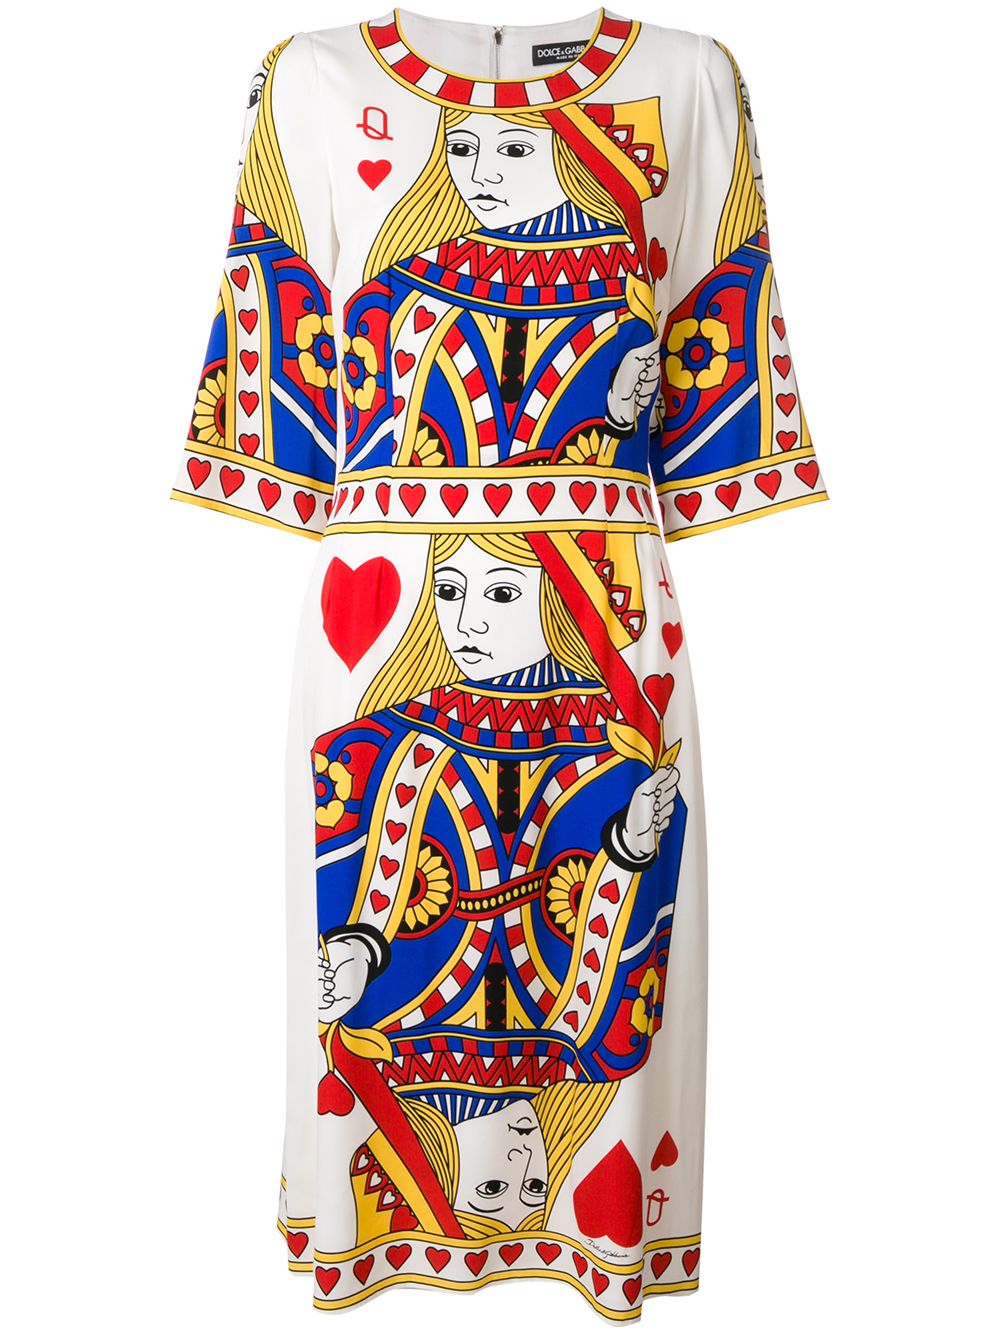 dolce and gabbana queen of hearts t shirt